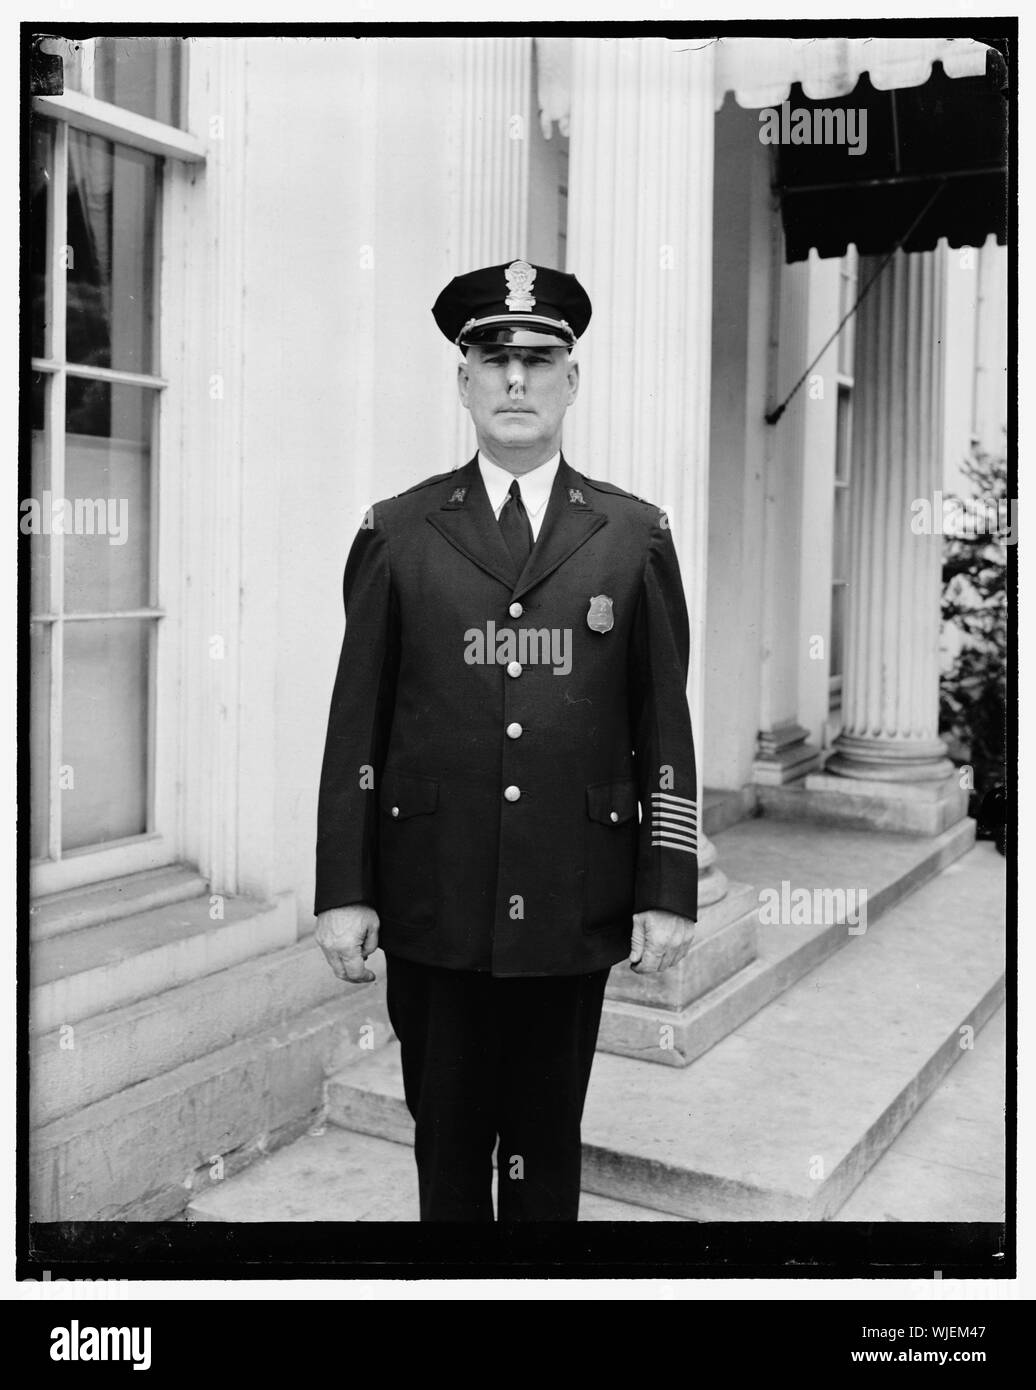 Heads White House police. Washington, D.C., June 25. Lieut. John M.D. McCubbin was today promoted to Captain of the White House police force. A Member of the force since 1922 he succeeds Capt. A.A. Walters, retired Stock Photo